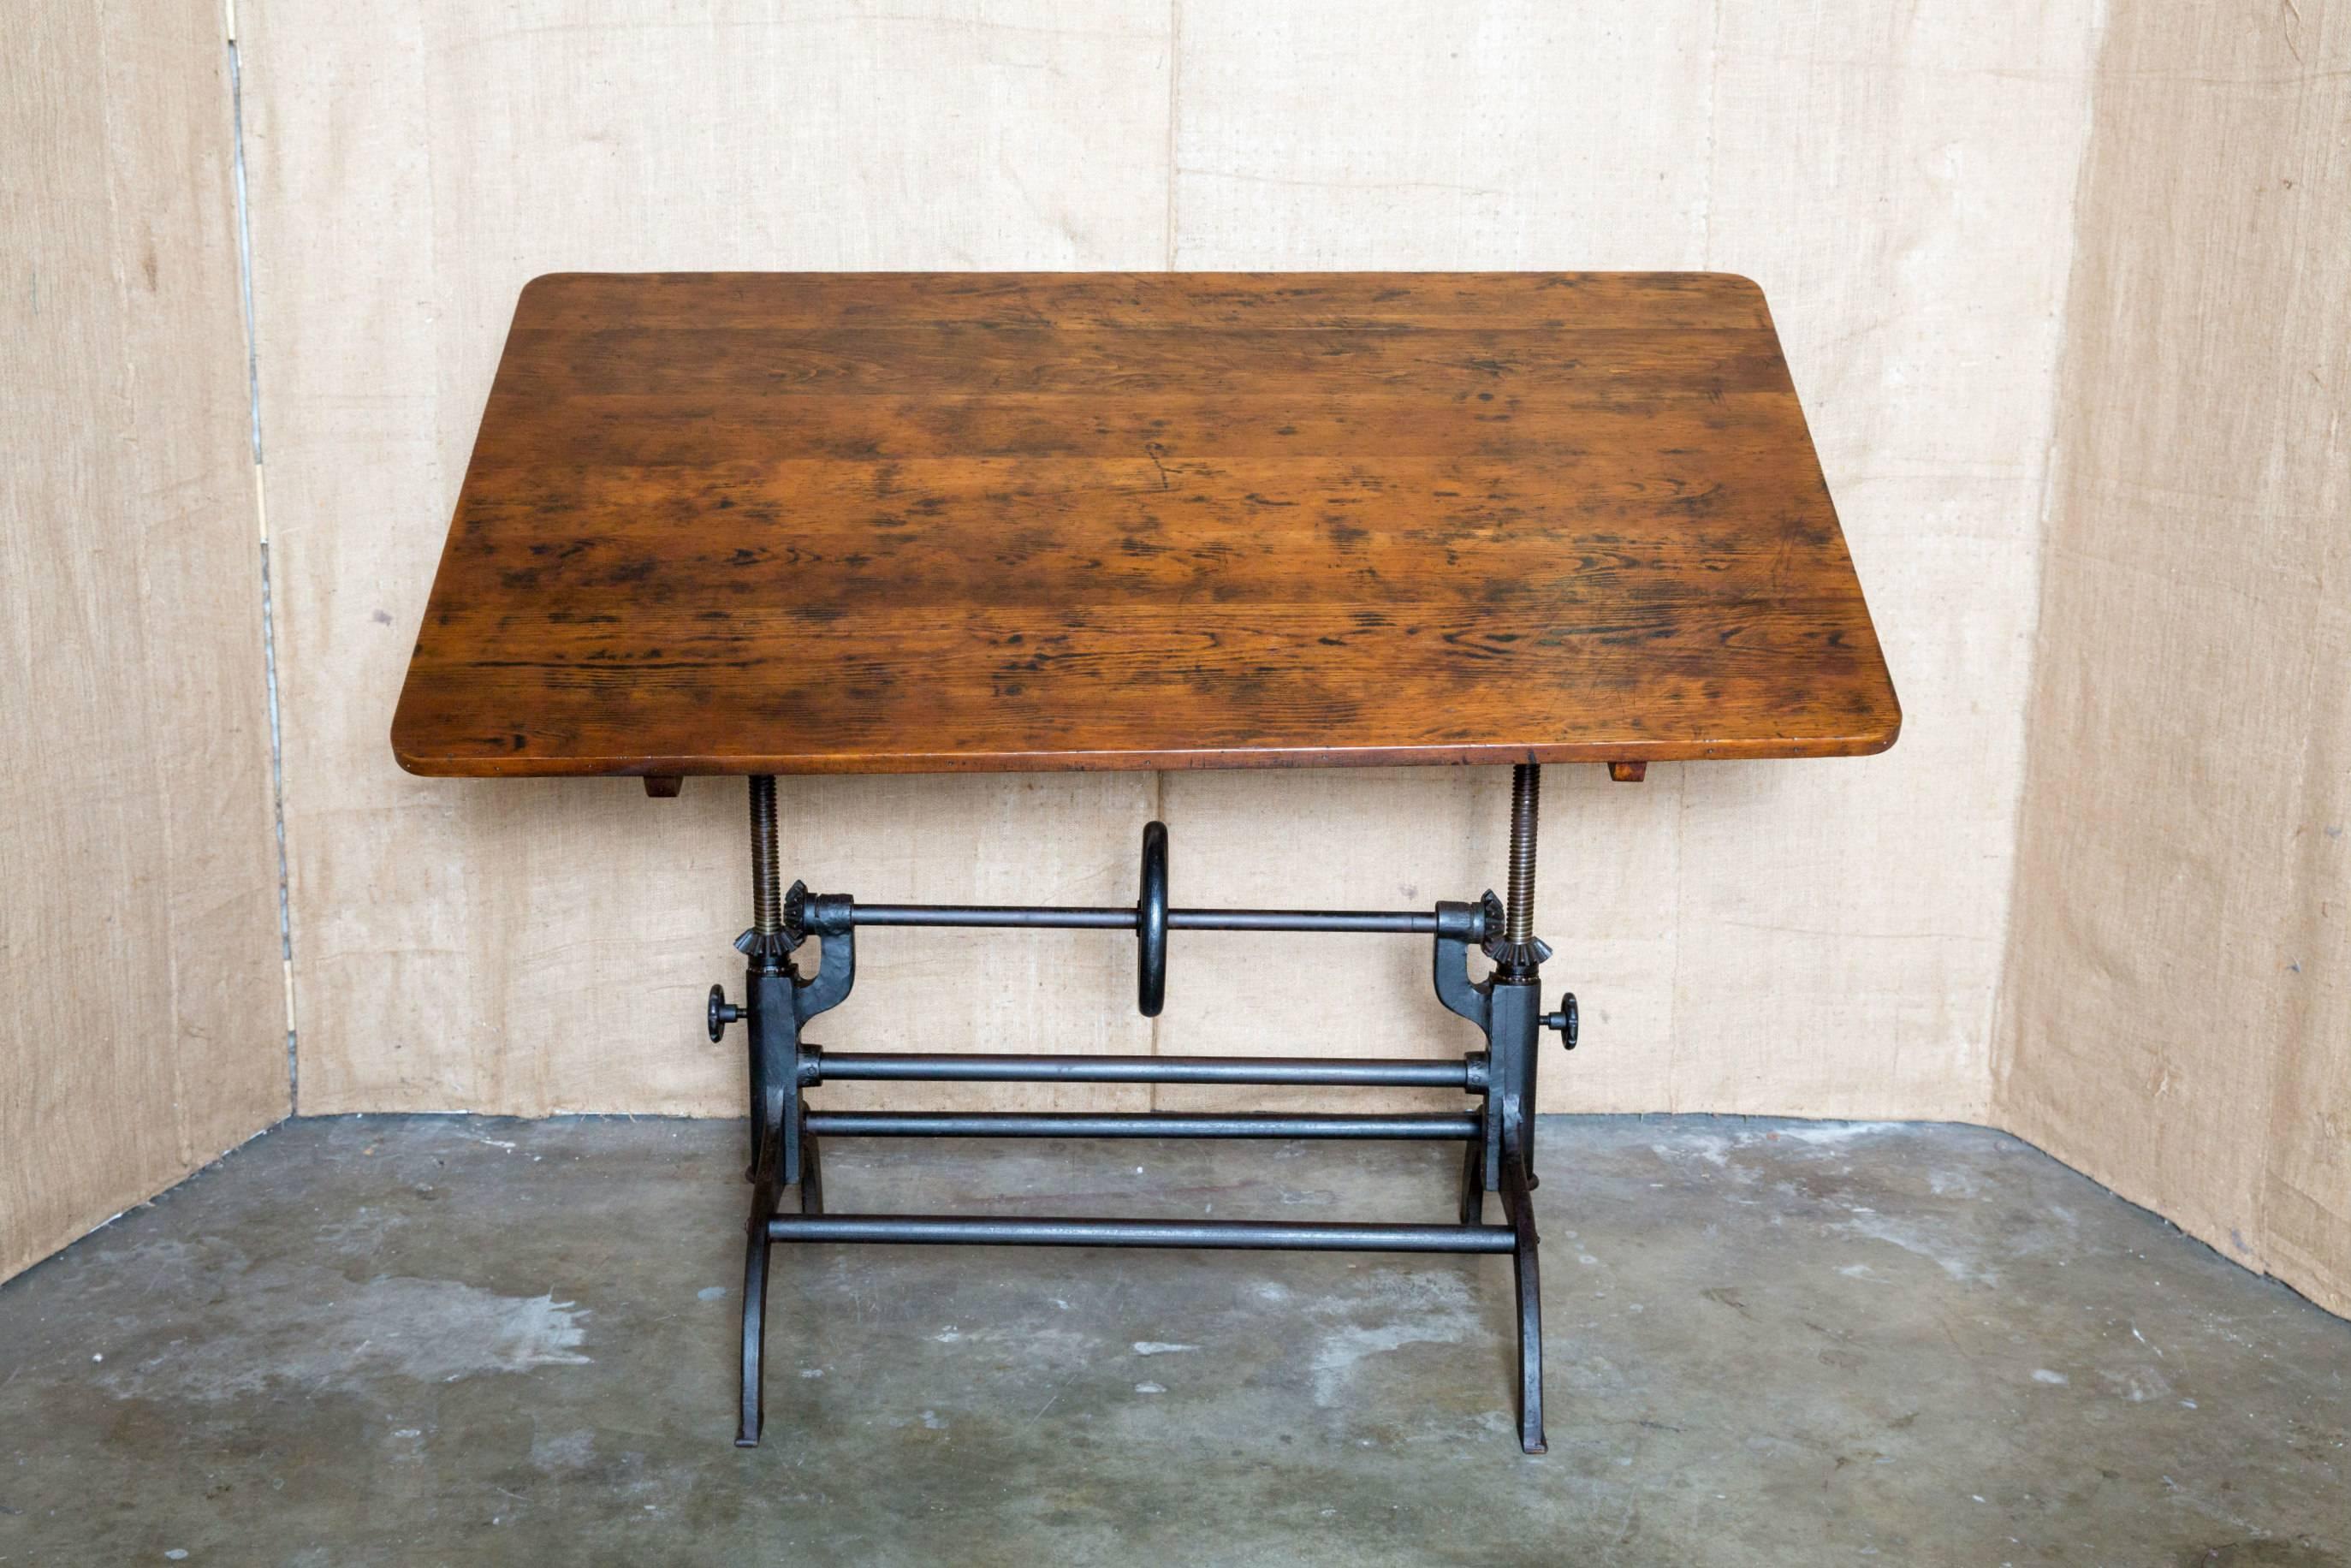 Vintage Hamilton drafting table with adjustable height and tilt, cast iron legs and hardware, articulating arm, and original pine top. Tilts in both directions for a very versatile work space.
Dimensions:
HEIGHT:	33.5